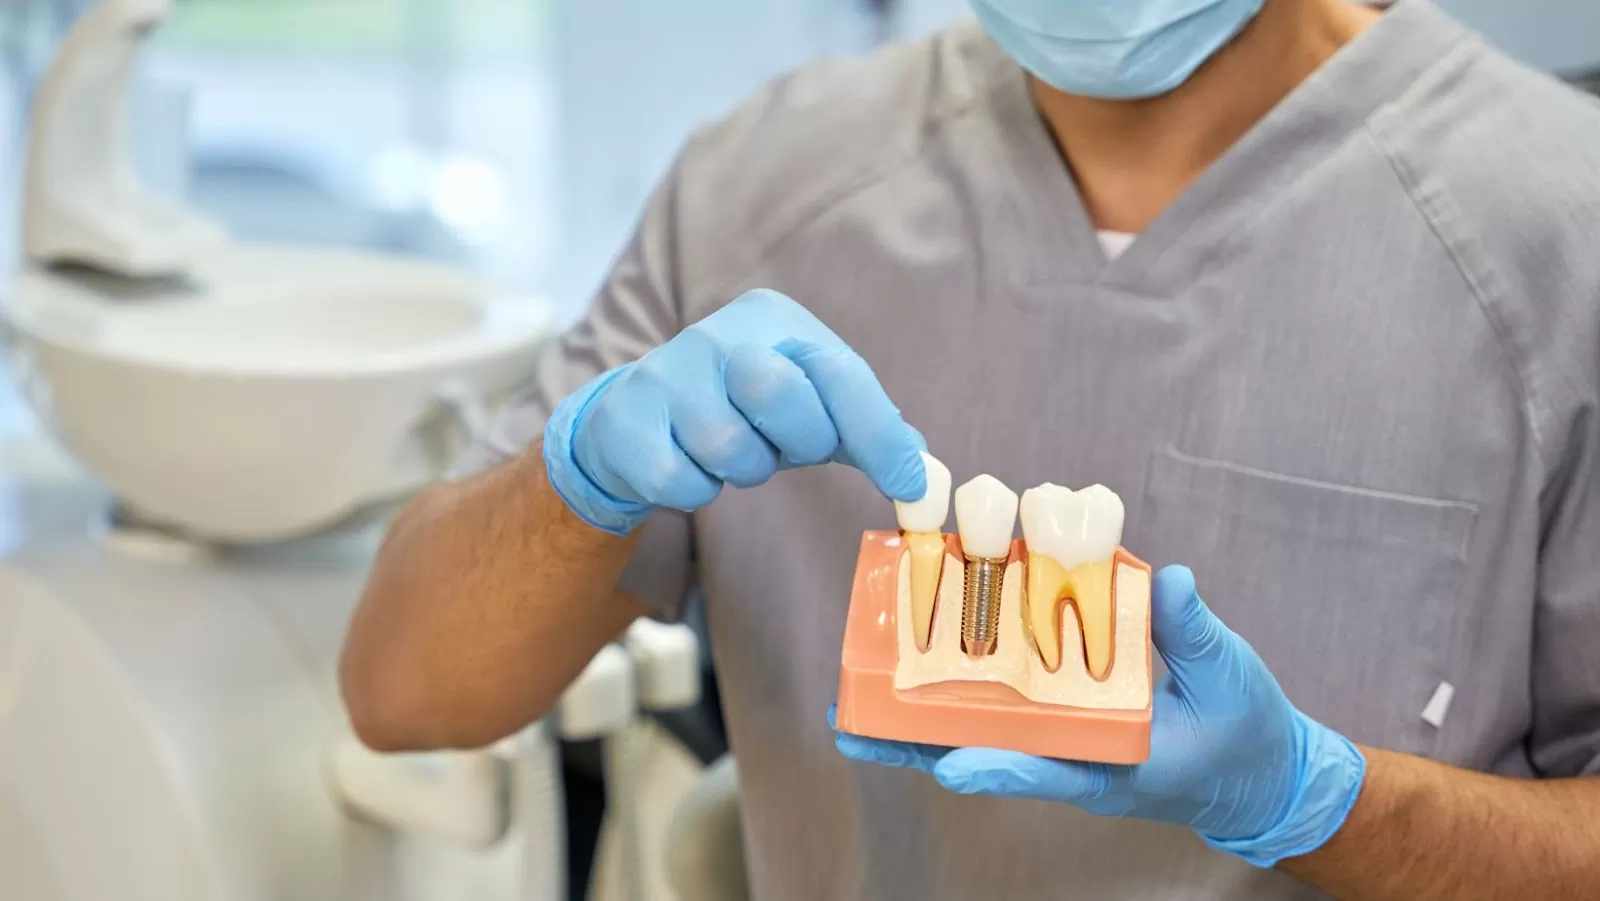 Everything You Need to Know Before Having Dental Implants